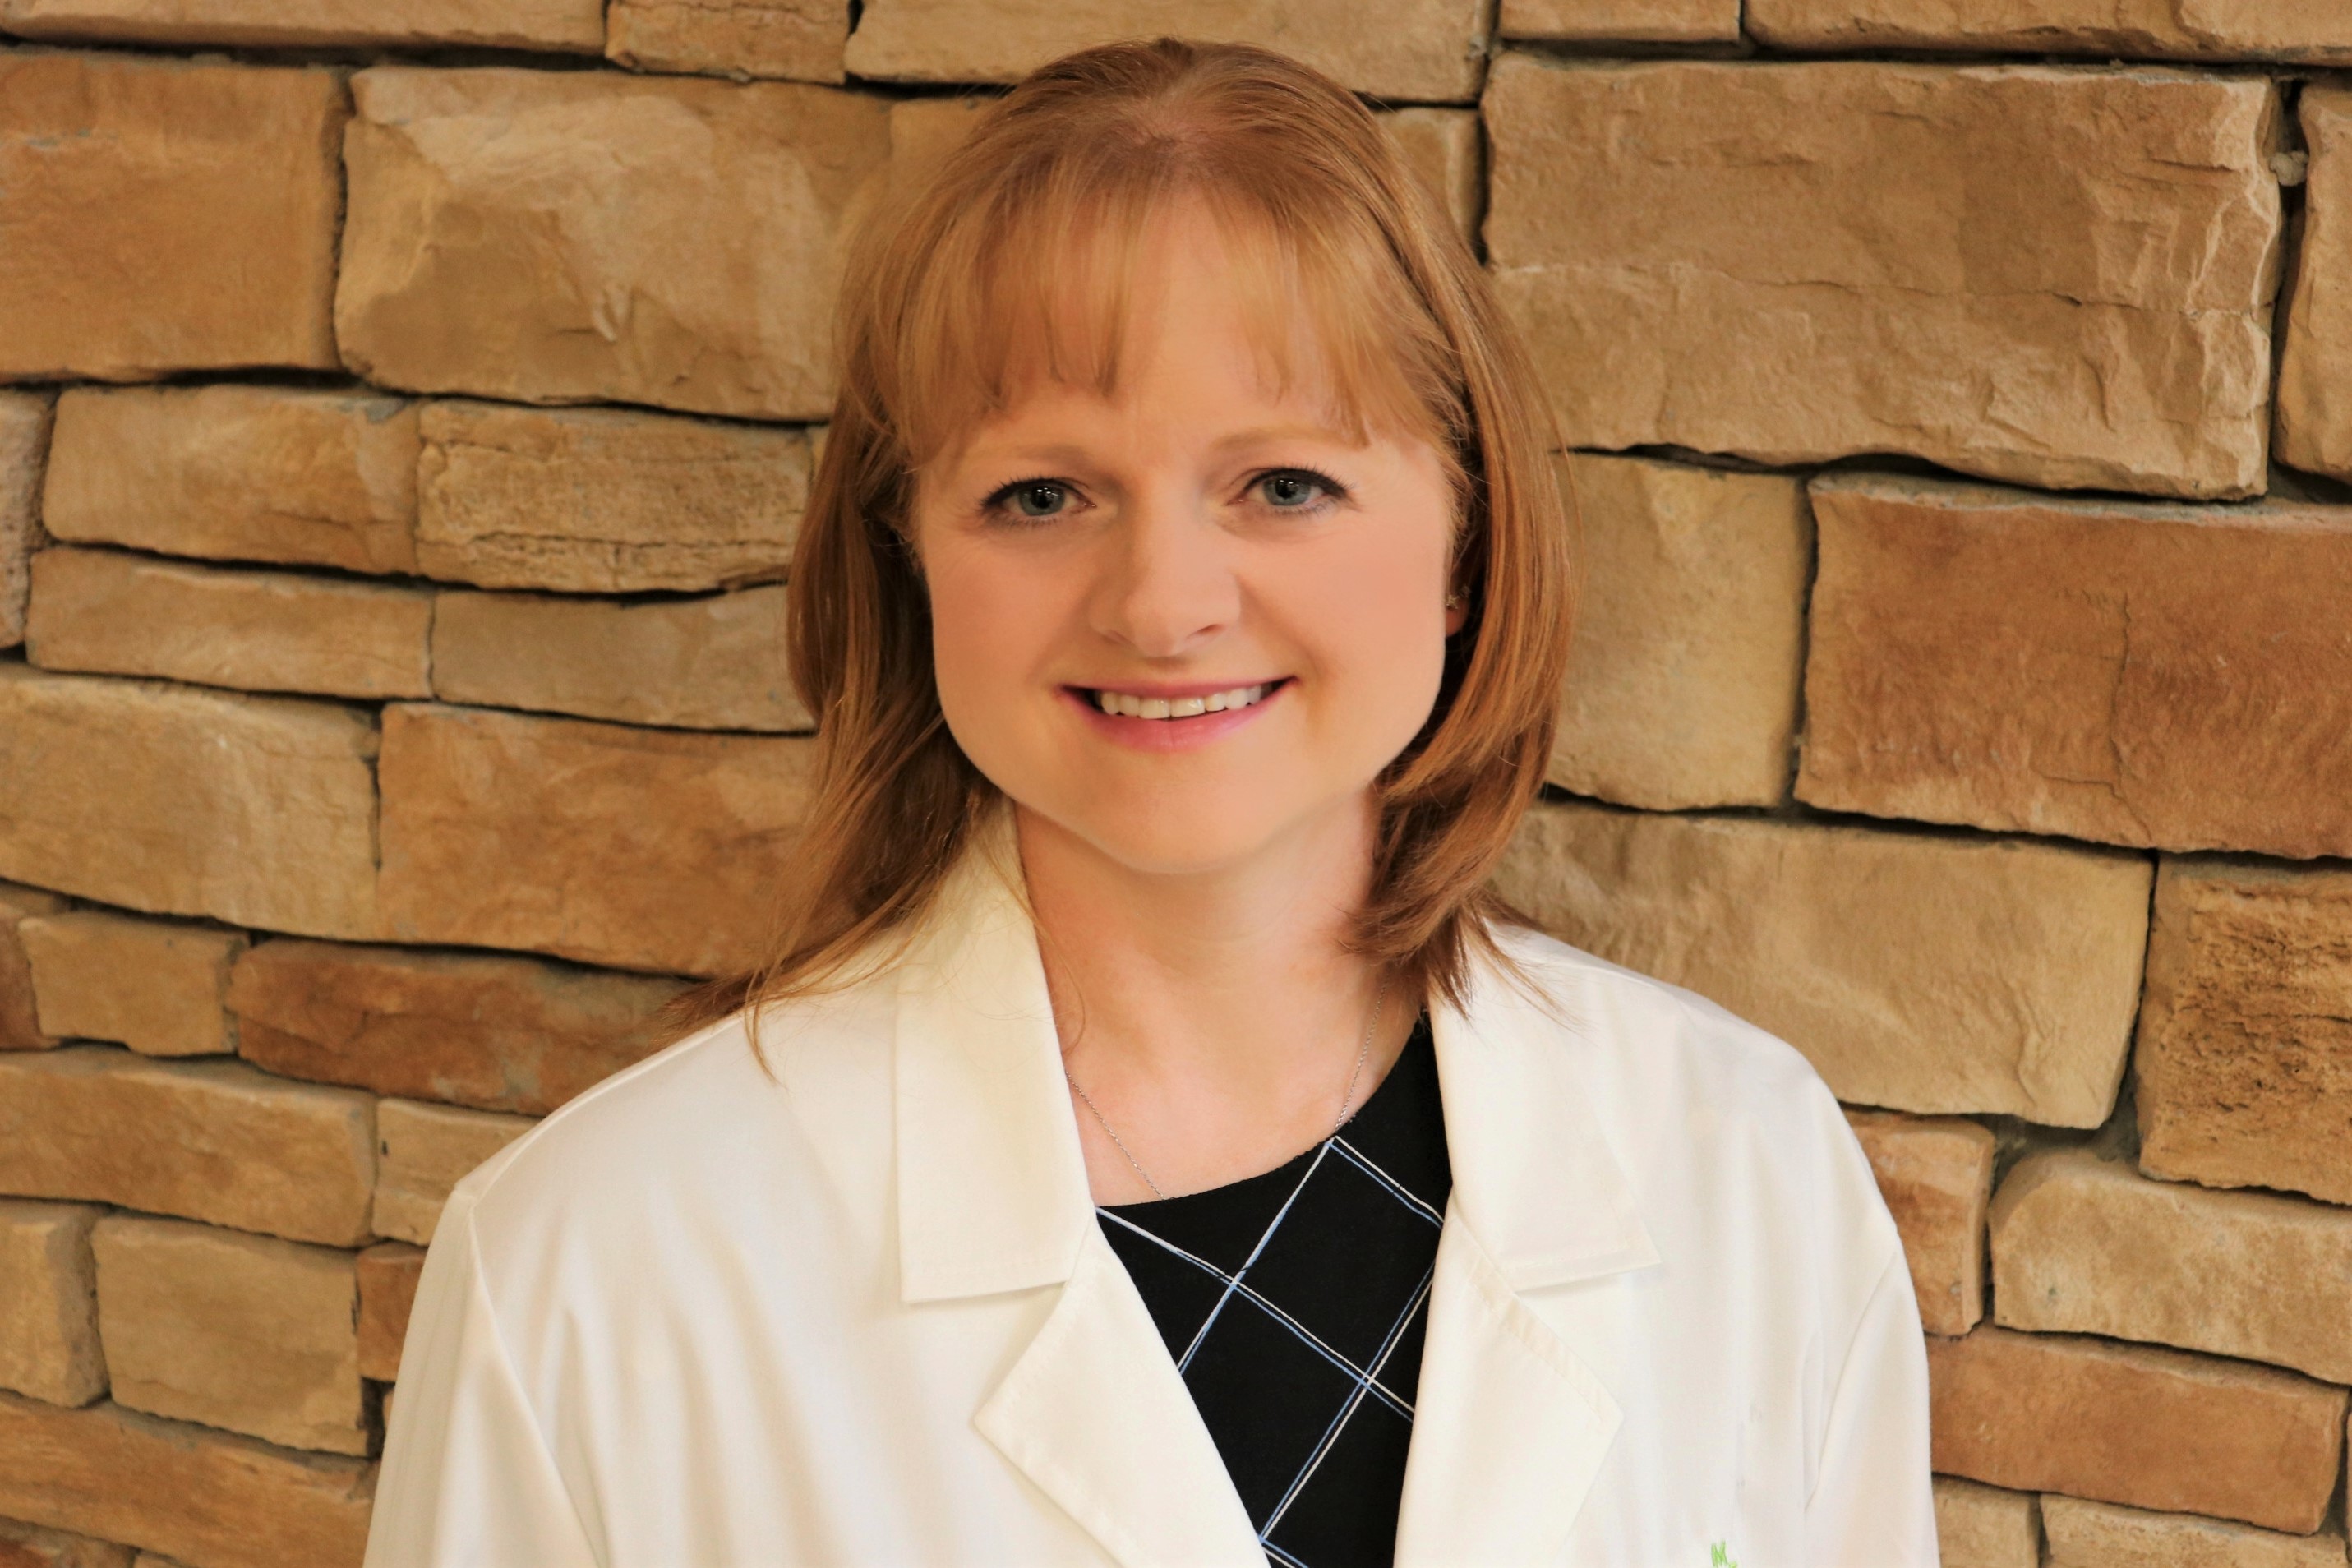 Mon Health Obstetrics & Gynecology Welcomes Crystal Nestor, MSN, APRN, FNP-BC, WHNP-BC to Kingwood